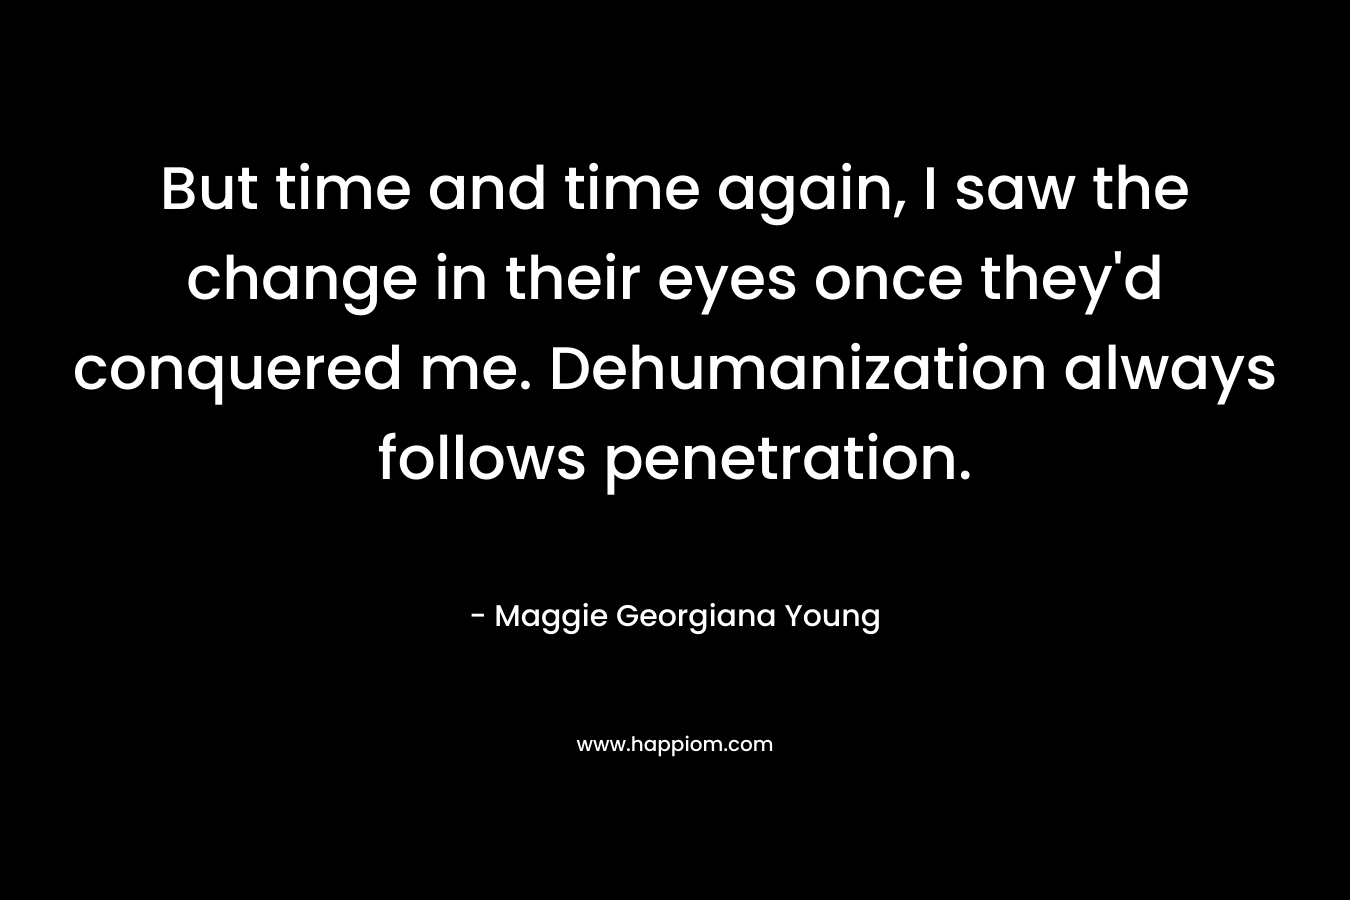 But time and time again, I saw the change in their eyes once they’d conquered me. Dehumanization always follows penetration. – Maggie Georgiana Young